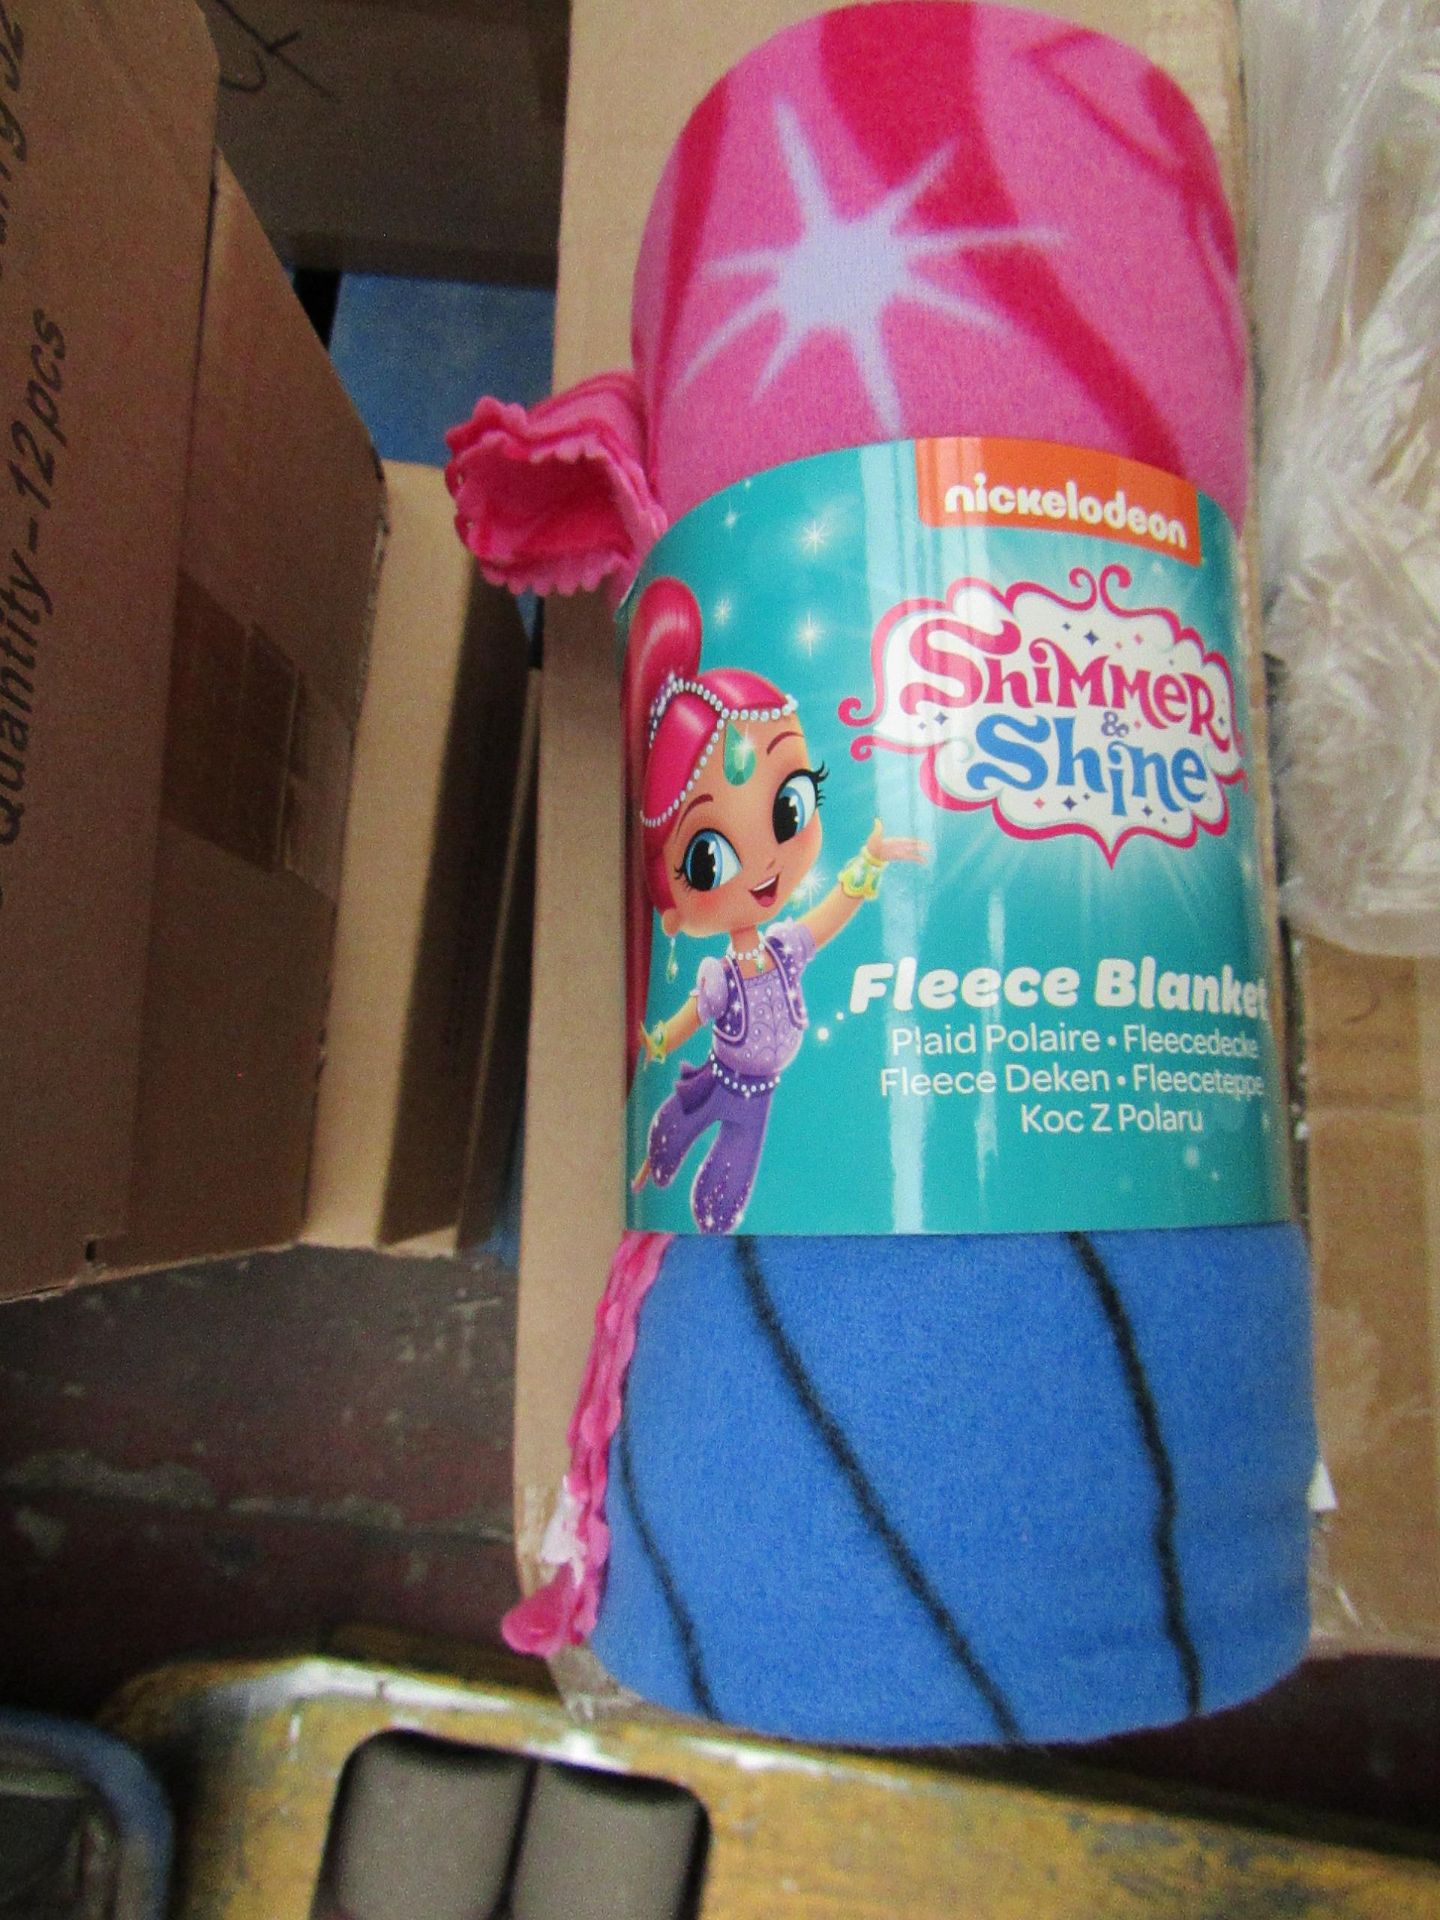 Simmer and Shine fleece blanket, new and packaged.